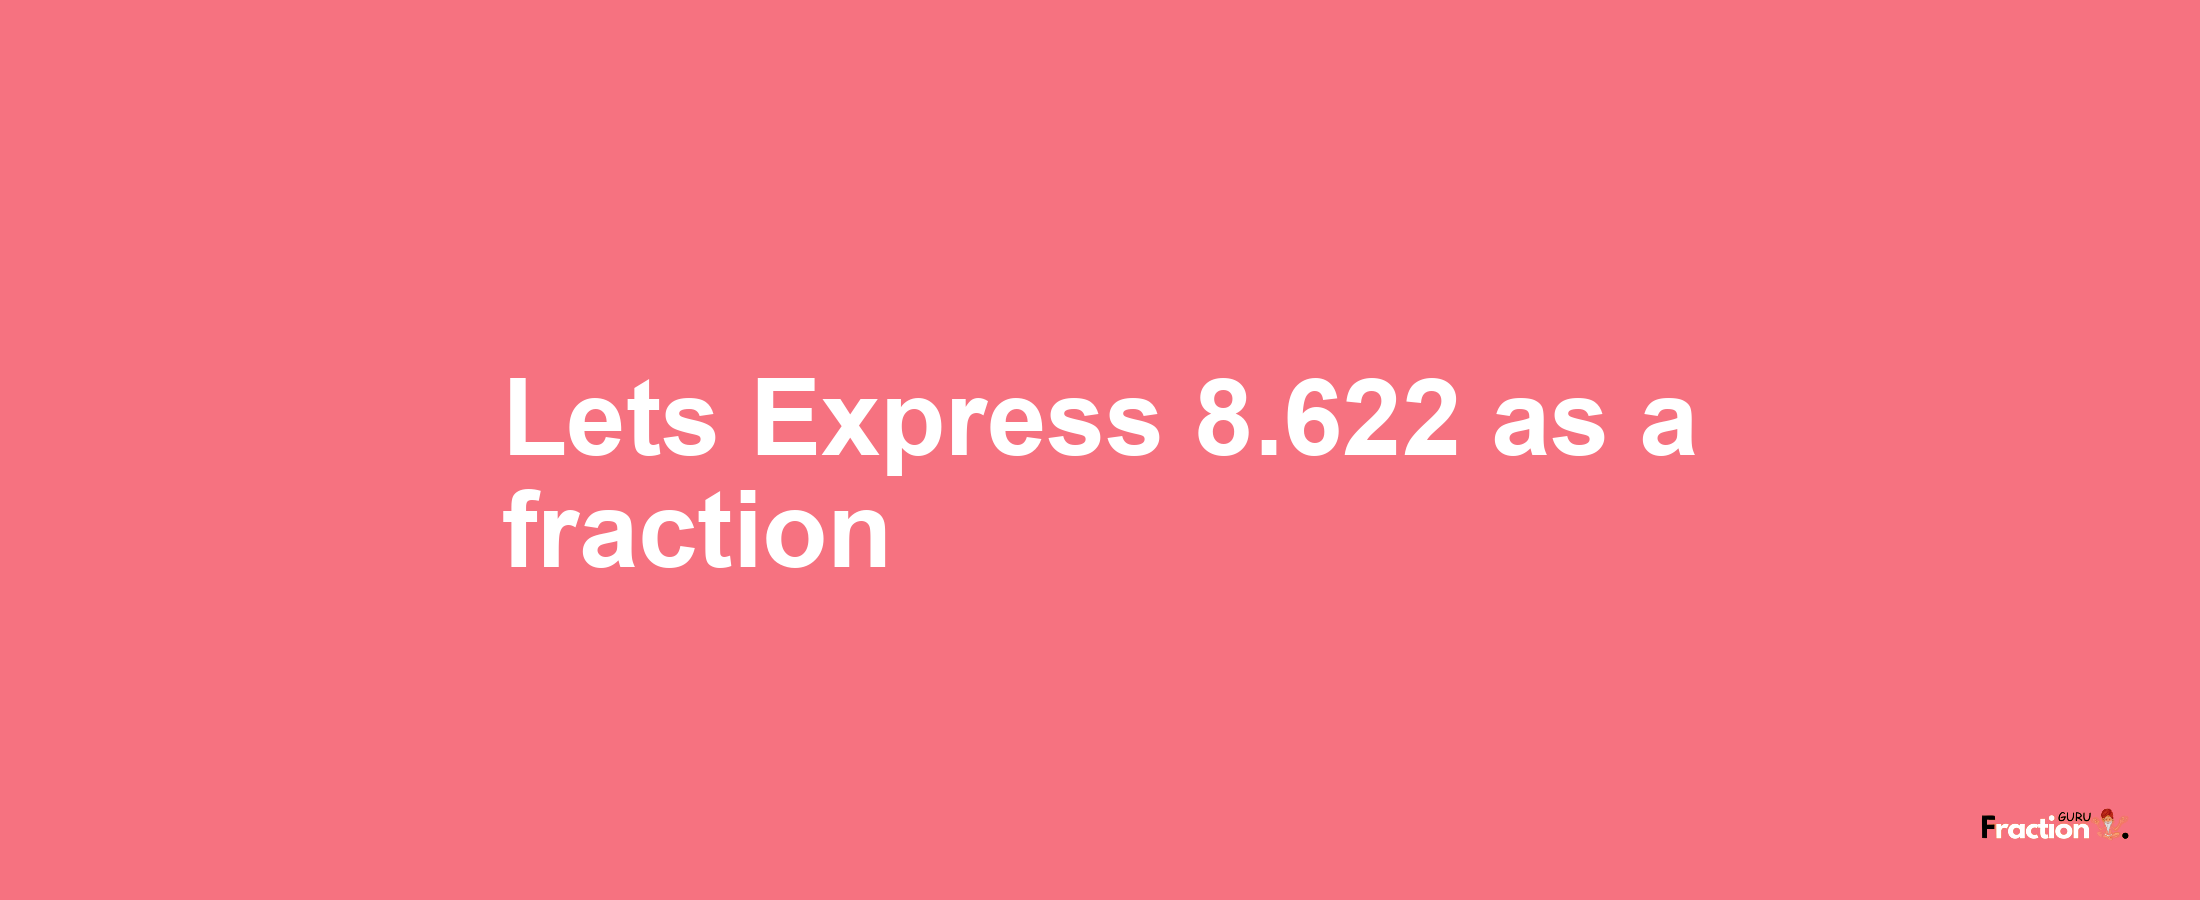 Lets Express 8.622 as afraction